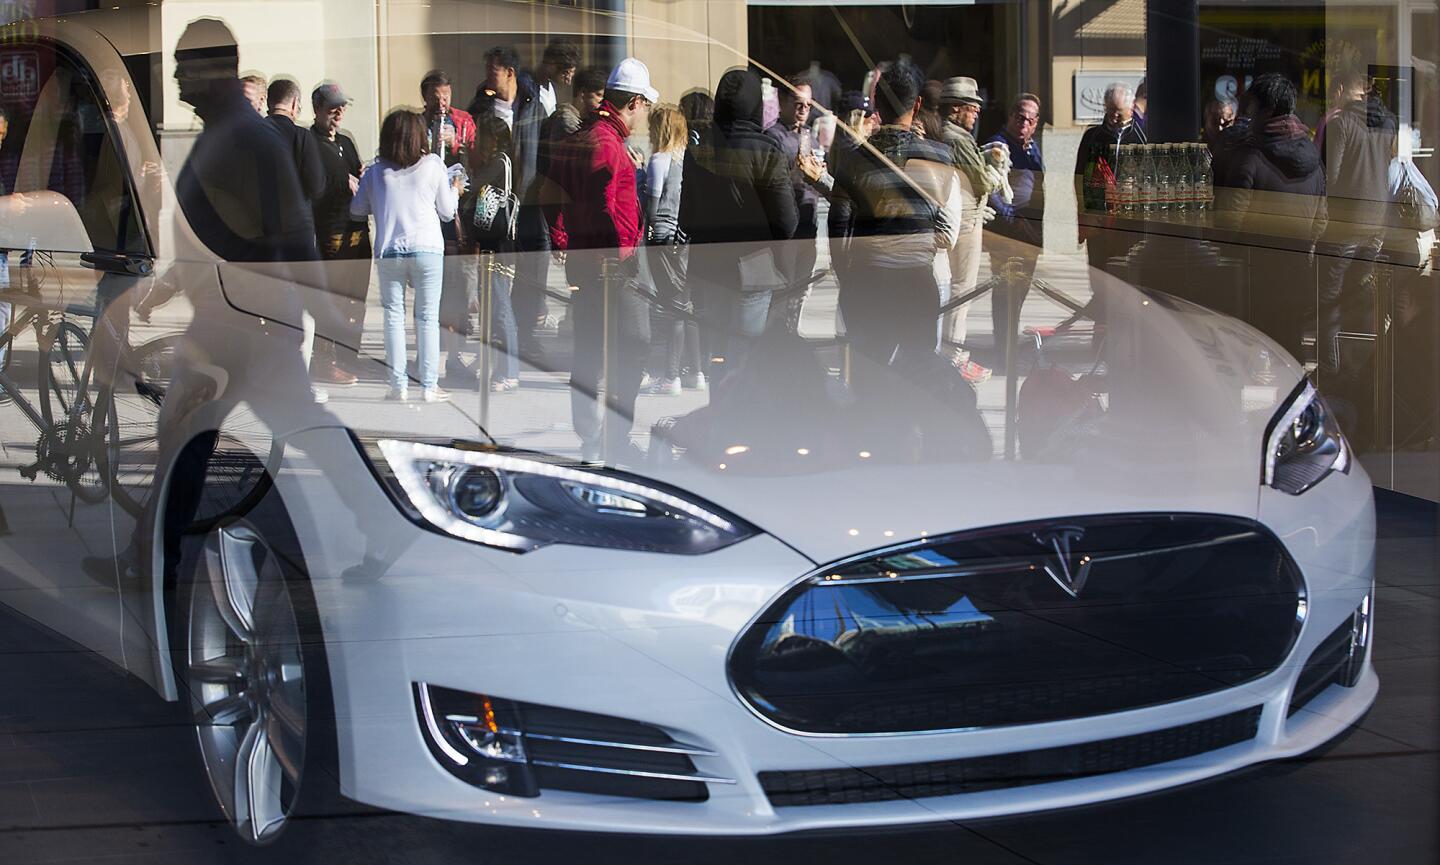 Prospective Tesla Model 3 owners are reflected with a Model S inside the Tesla showroom as hundreds wait in line to get a $1000 deposit in on the new electric car model expected to go into production next year in Santa Monica, Calif.